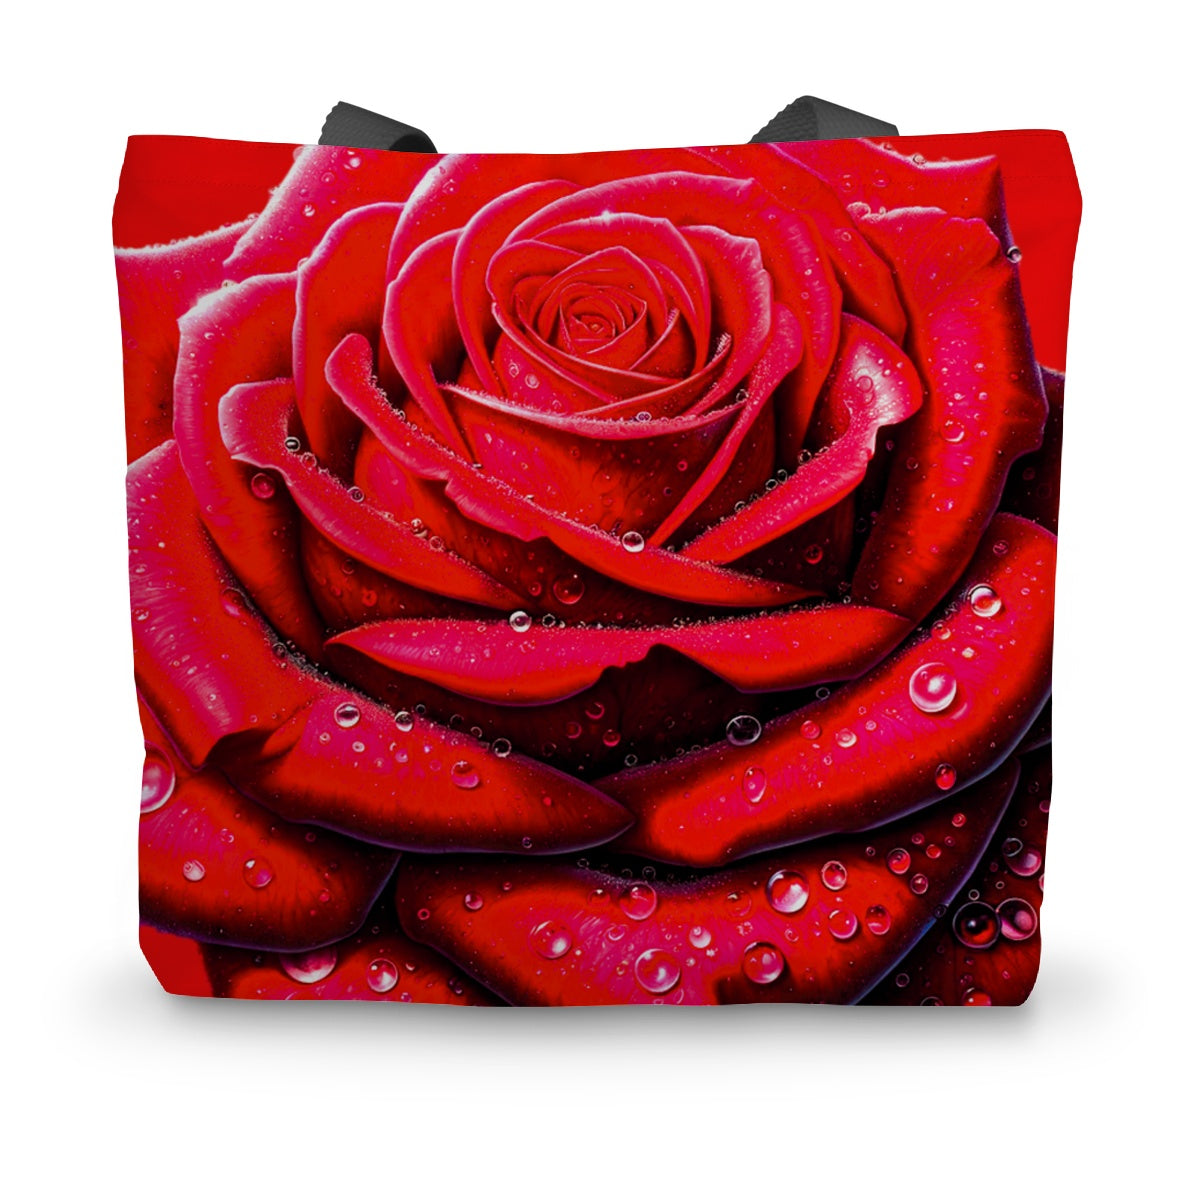 Red Rose Waterdrops Canvas Tote Bag